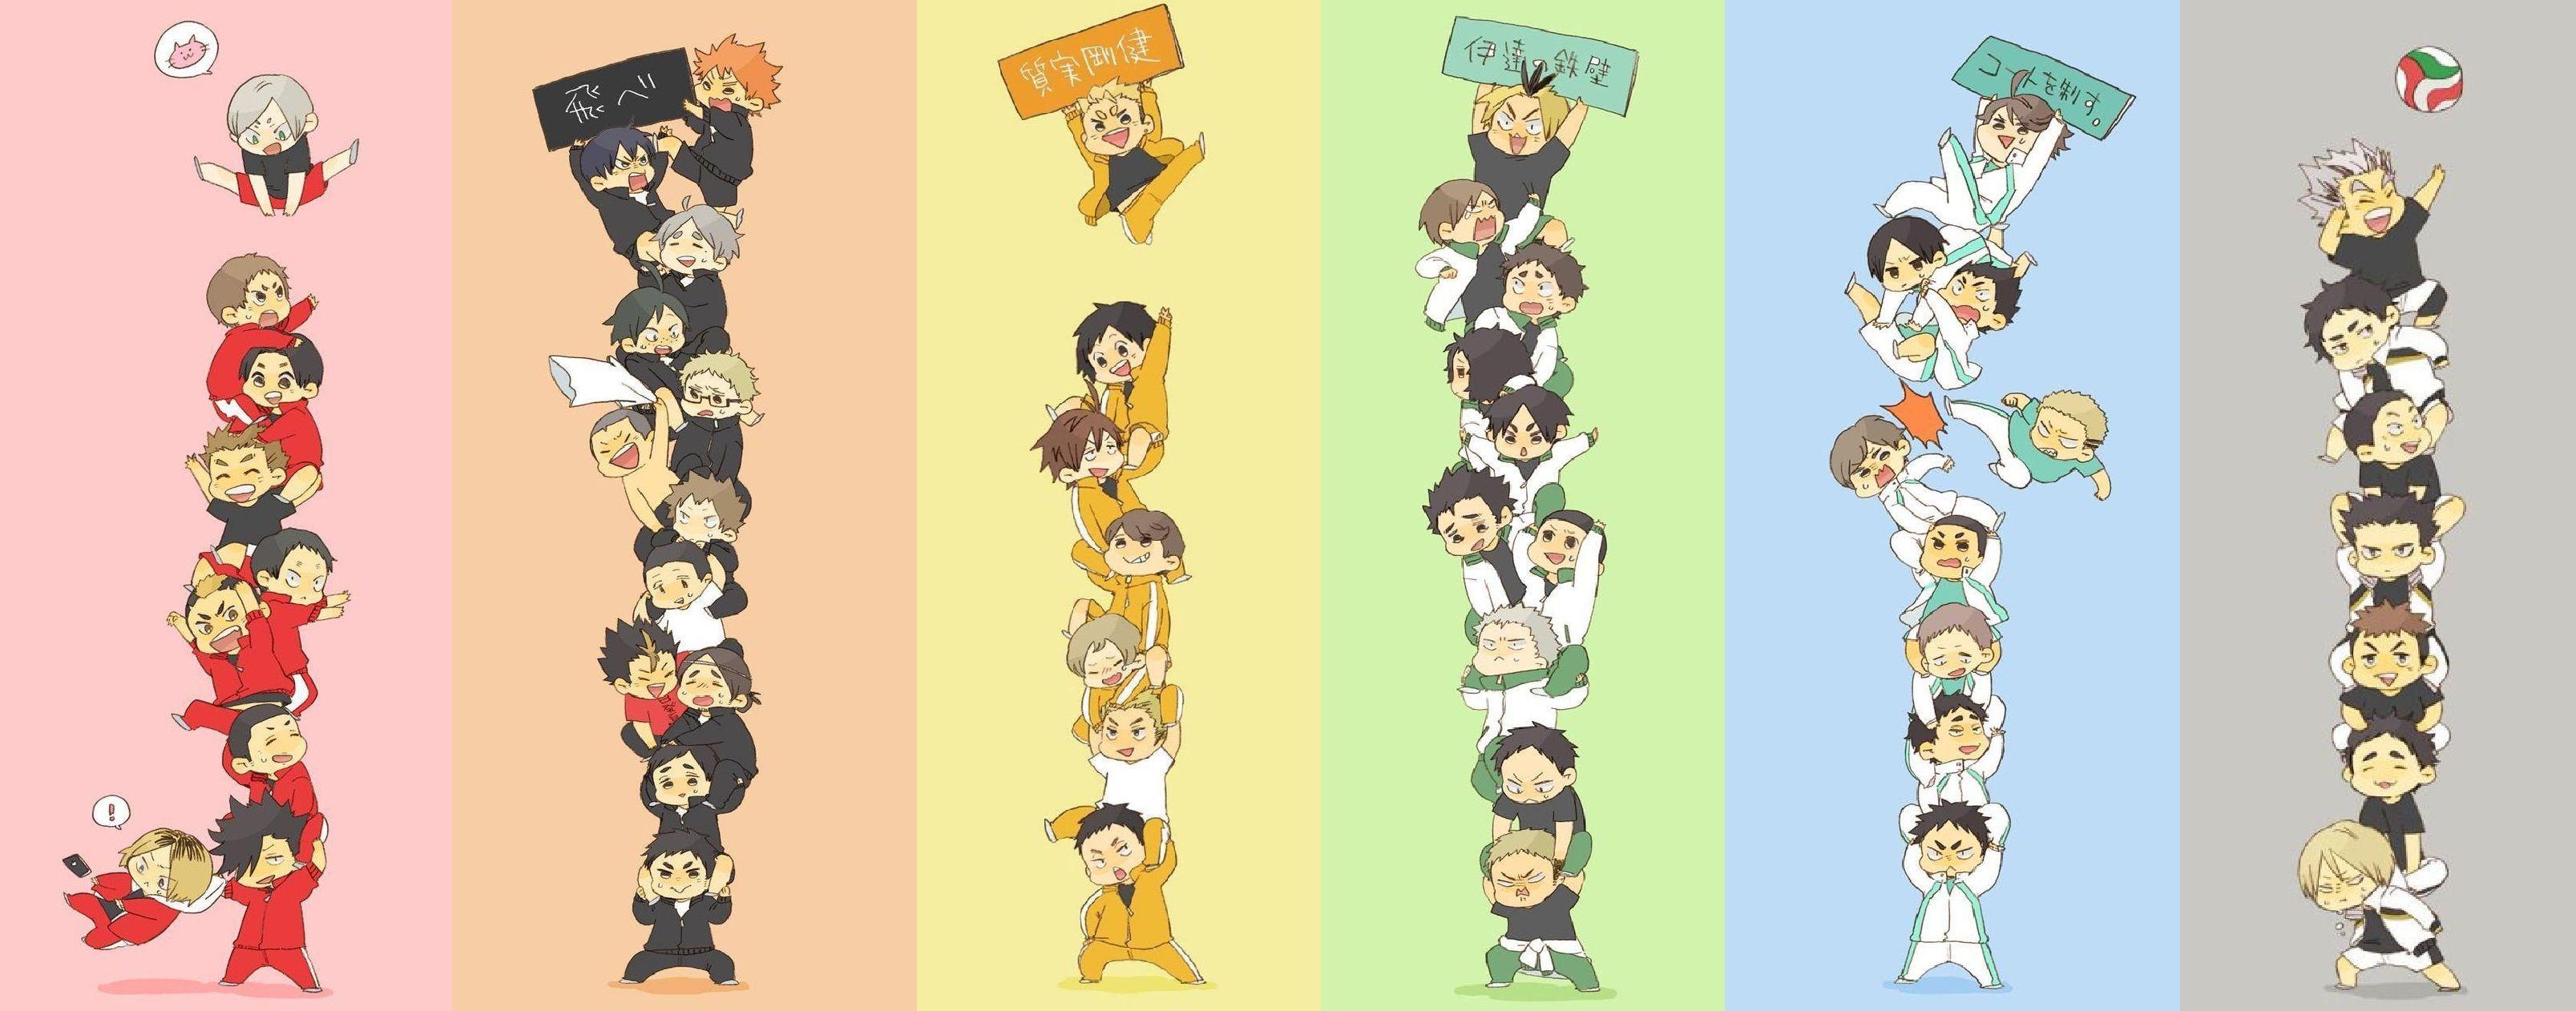 Featured image of post Anime Laptop Wallpaper Haikyuu / Best haikyuu wallpaper haikyuu anime wallpaper haikyuu hd wallpaper haikyuu wallpaperimage size this wallpaper is 1920 x 1080this image pos.